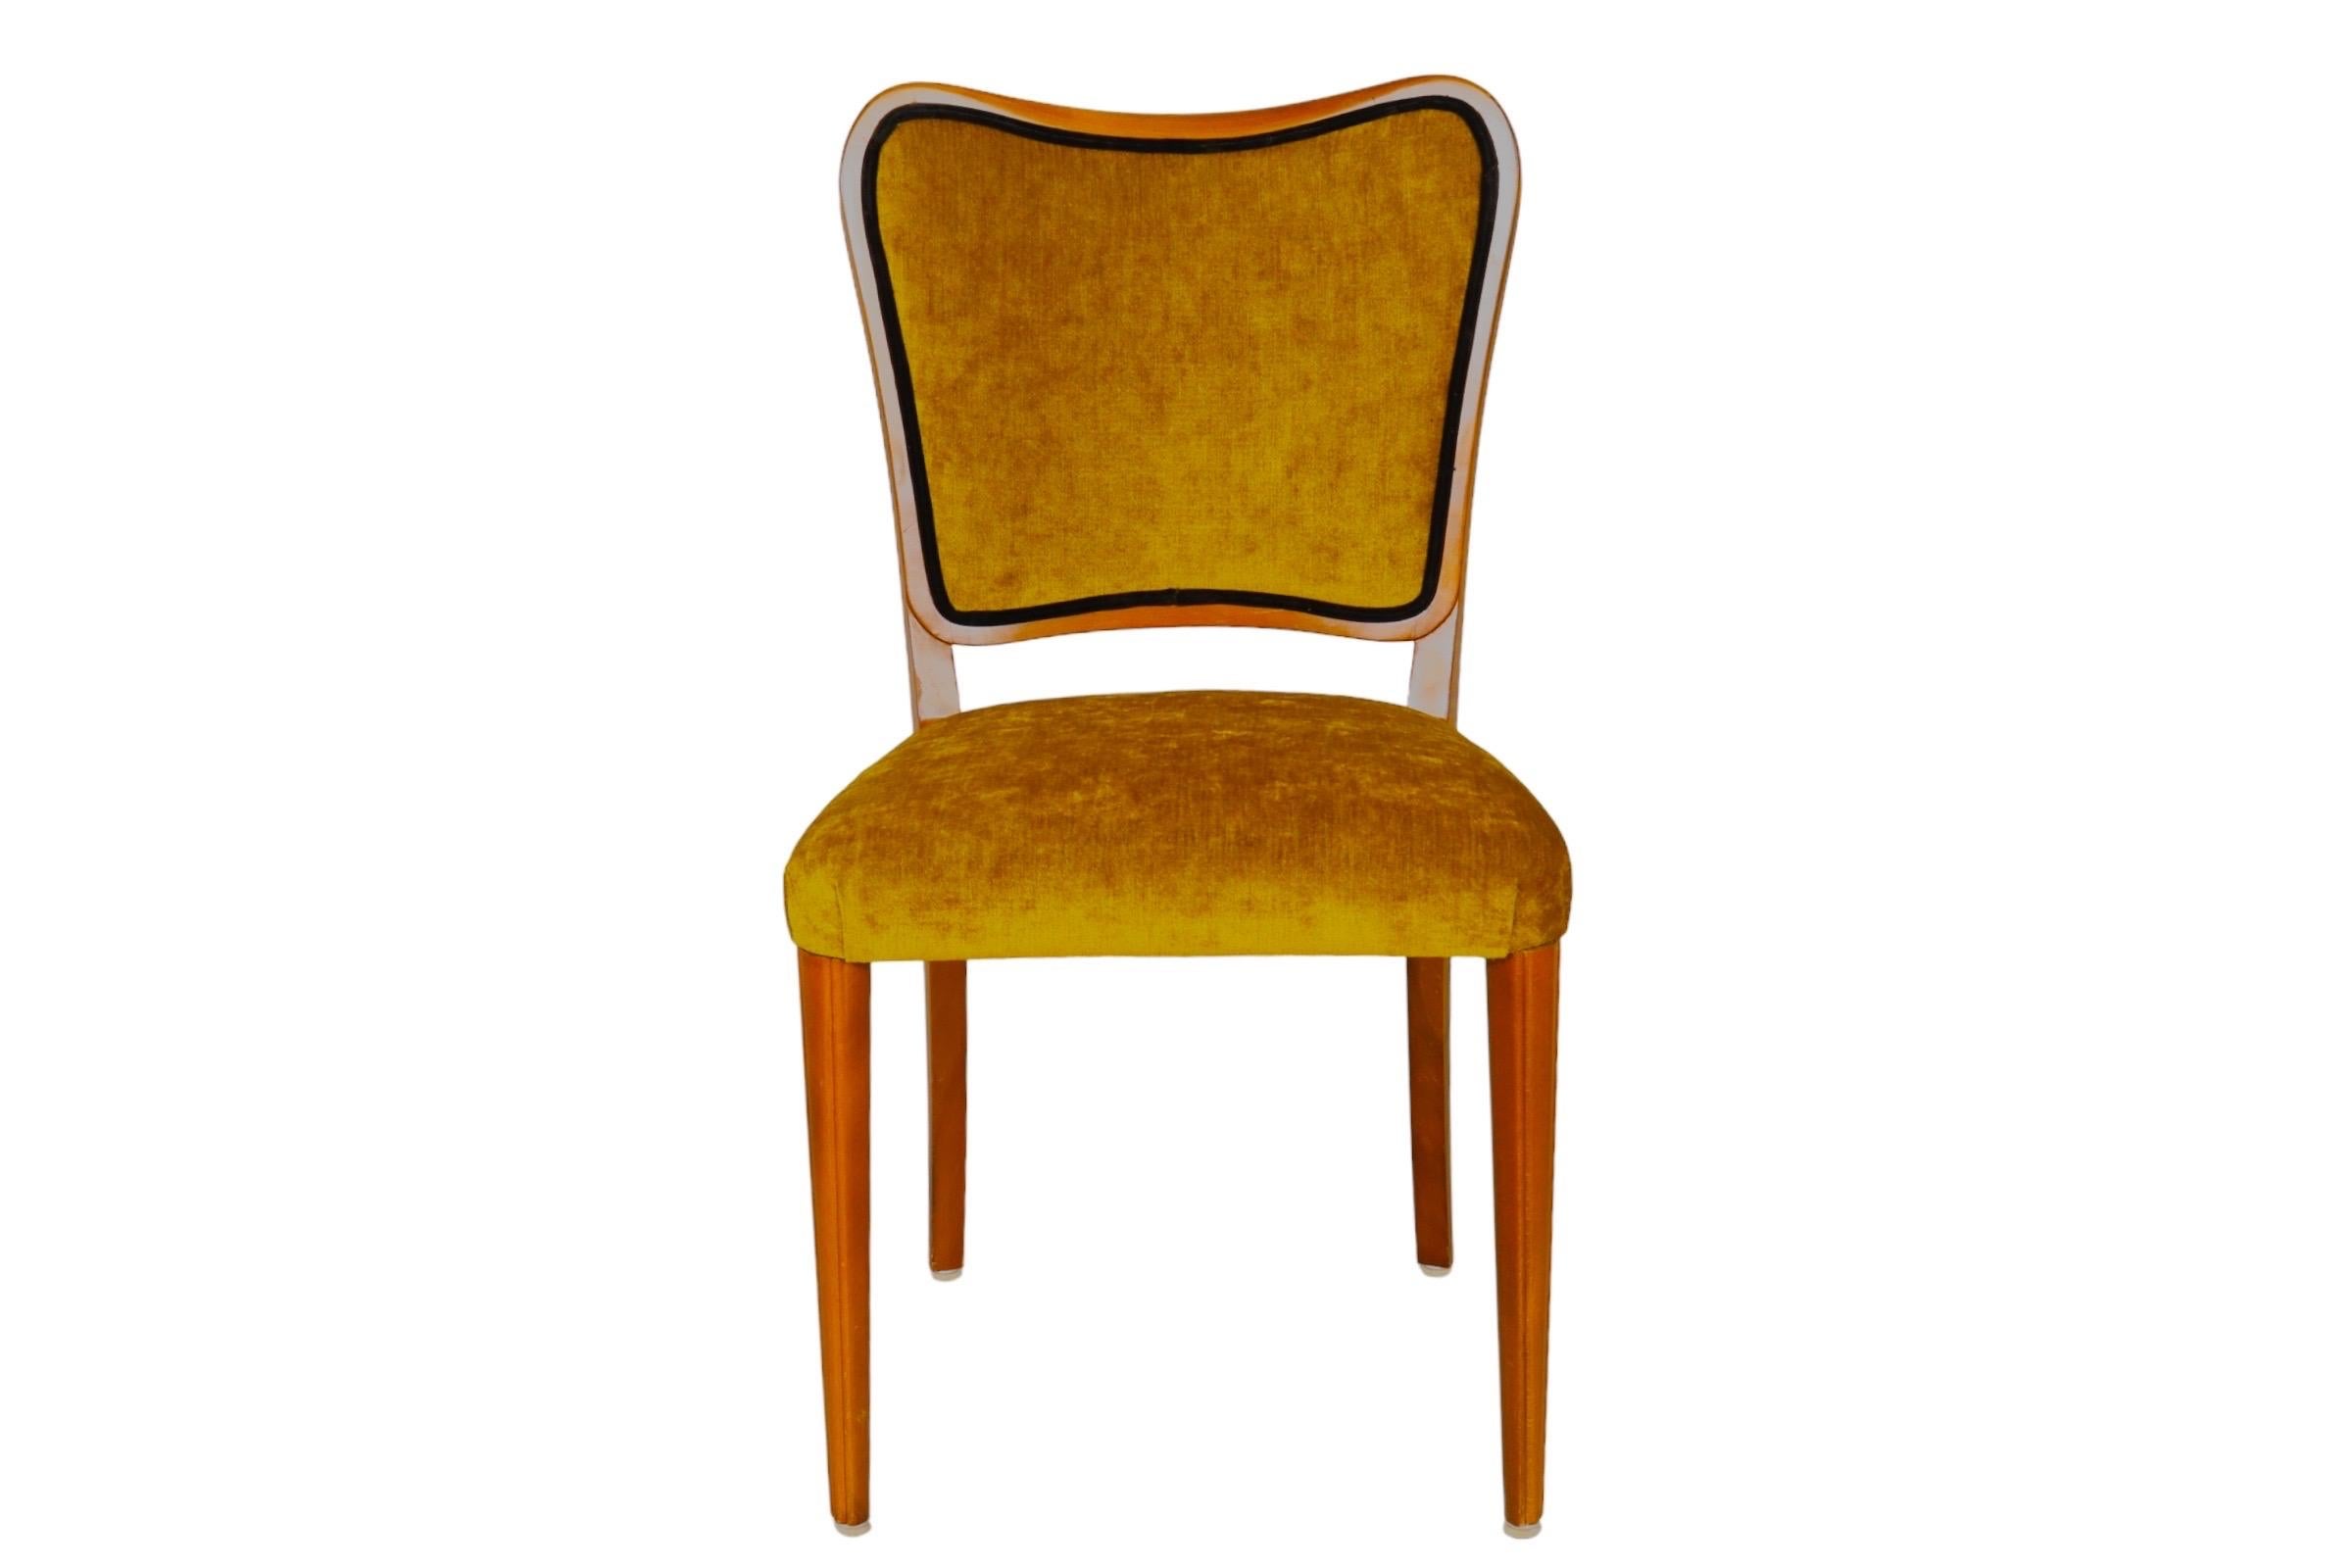 Set of 4 Danish Mid-Century Modern dining chairs made of teak. Newly upholstered throughout in chartreuse velvet.